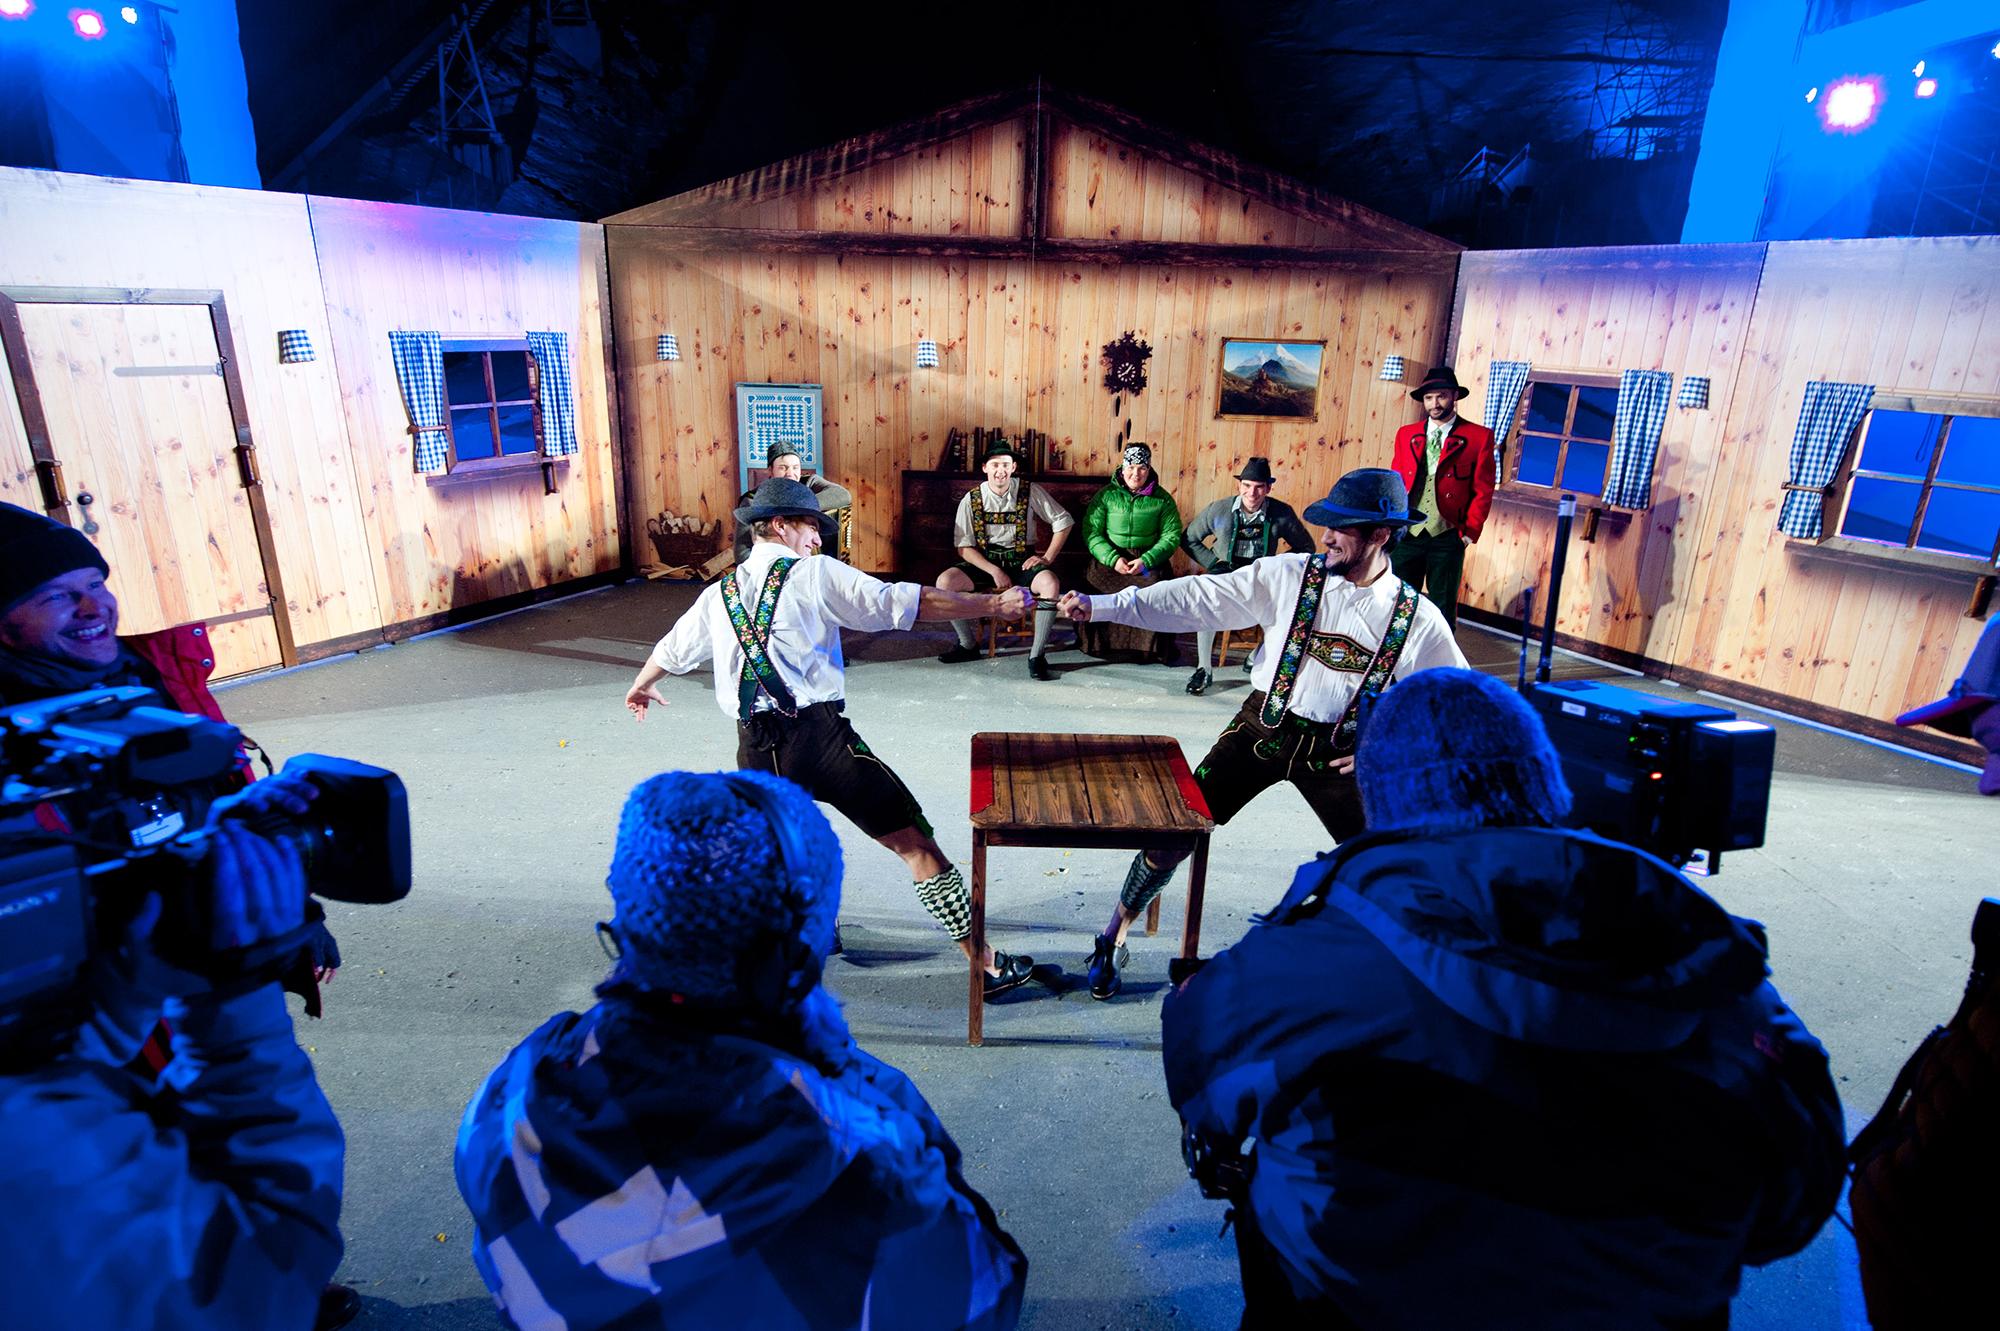 Performers on a stage set up to look like an alpine hut, wearing traditonal Tracht clothing, dance while a cameraperson films them.